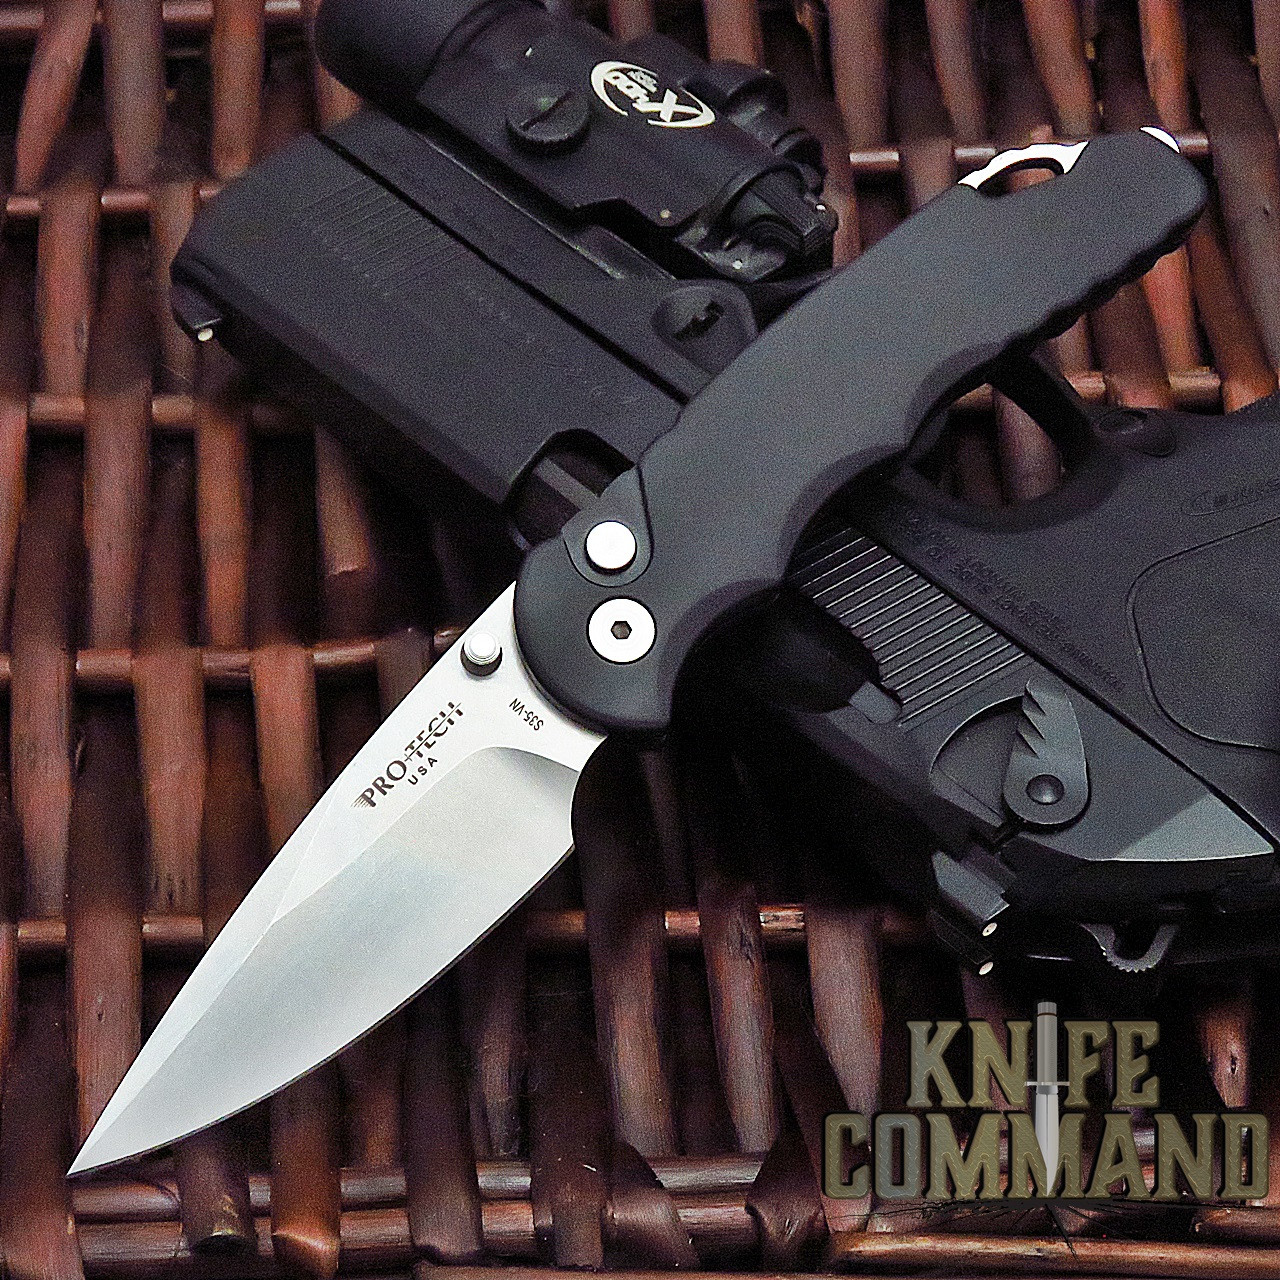 Pro-Tech Knives Tactical Response TR-5 SA.1 Lerch Titanium Assisted Opening Knife Tactical Folder 3.25"Stonewashed S35VN Blade